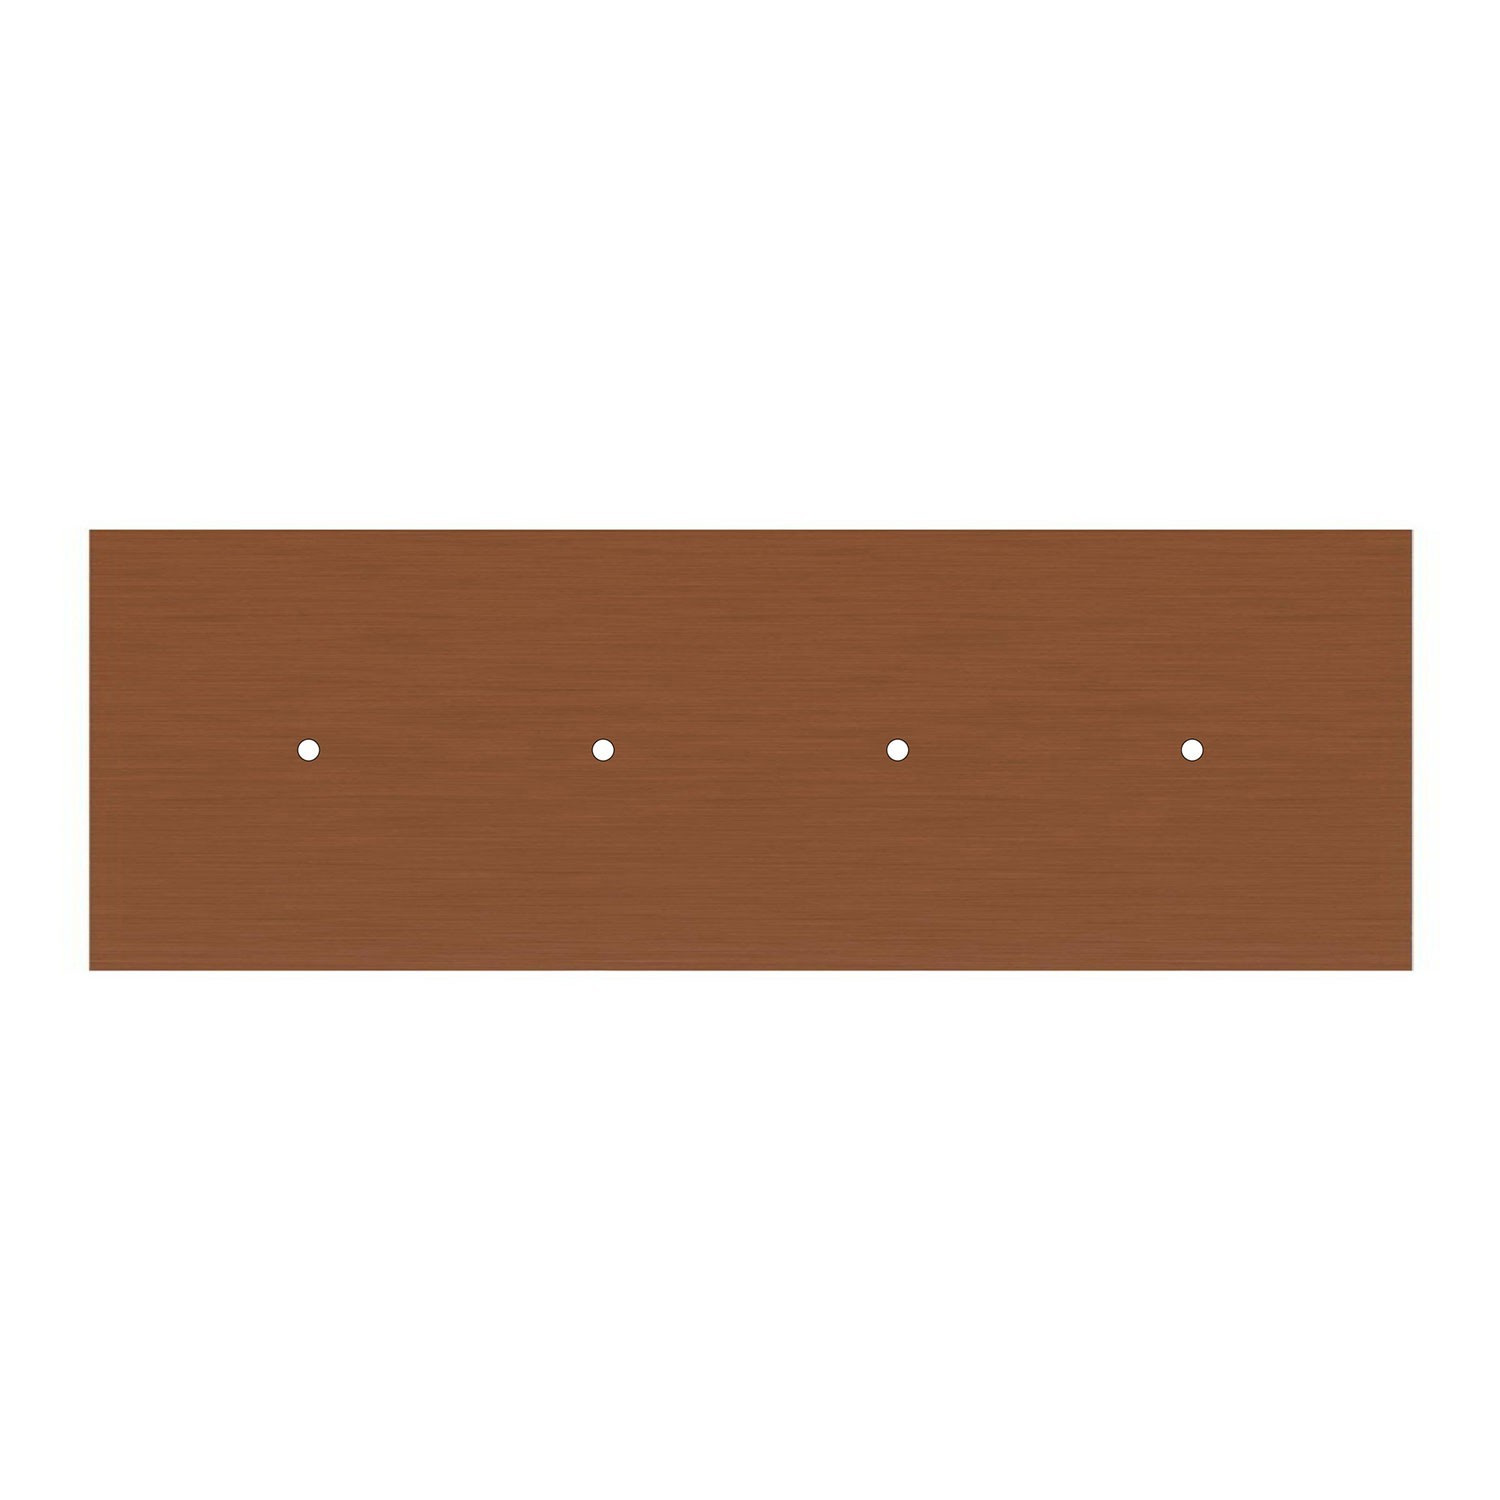 Rectangular Panel for pre-drilled Rose-One, width 675 mm, length 225 mm